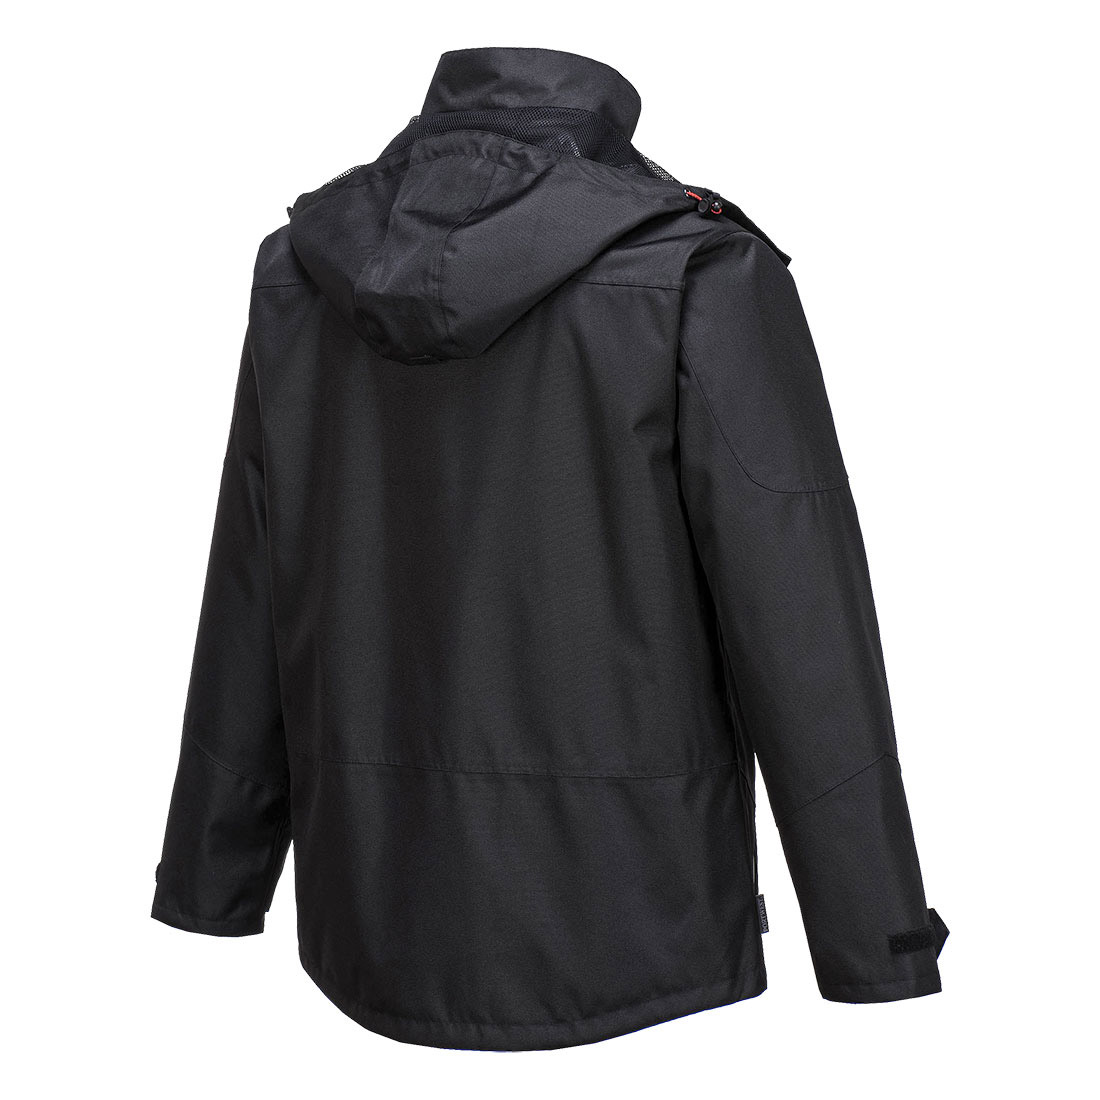 High Performance Windproof Waterproof Breathable Jacket with Storm Hood